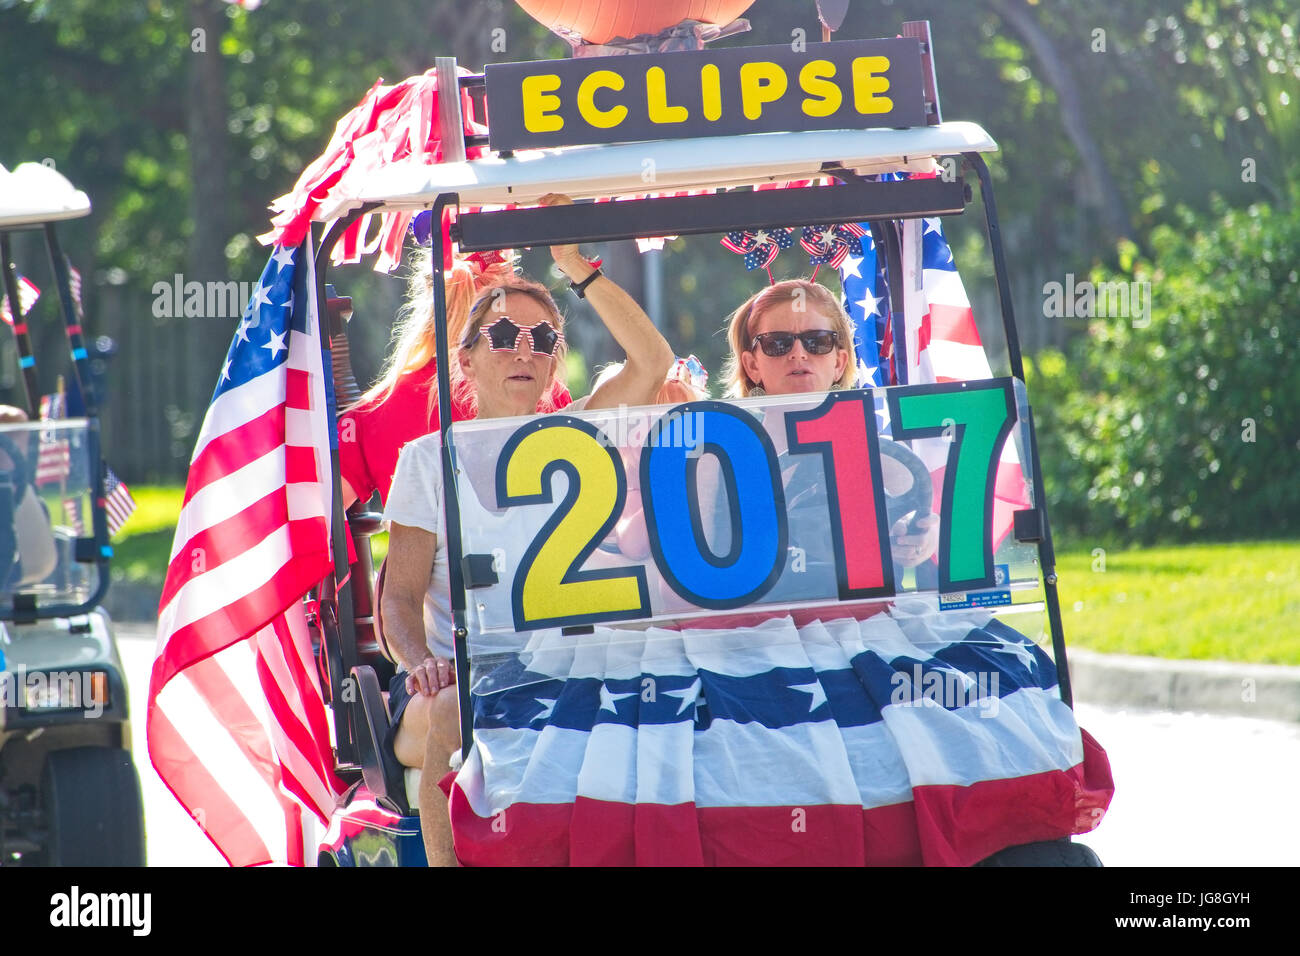 Sullivan's Island, South Carolina, USA. 4th July, 2017. A family rides a golf cart celebrating the upcoming solar eclipse during the annual Sullivan's Island Independence Day parade July 4, 2017 in Sullivan's Island, South Carolina. The solar eclipse will be visible from the Charleston area for the longest period in the continental USA before moving over the Atlantic Ocean. Credit: Planetpix/Alamy Live News Stock Photo